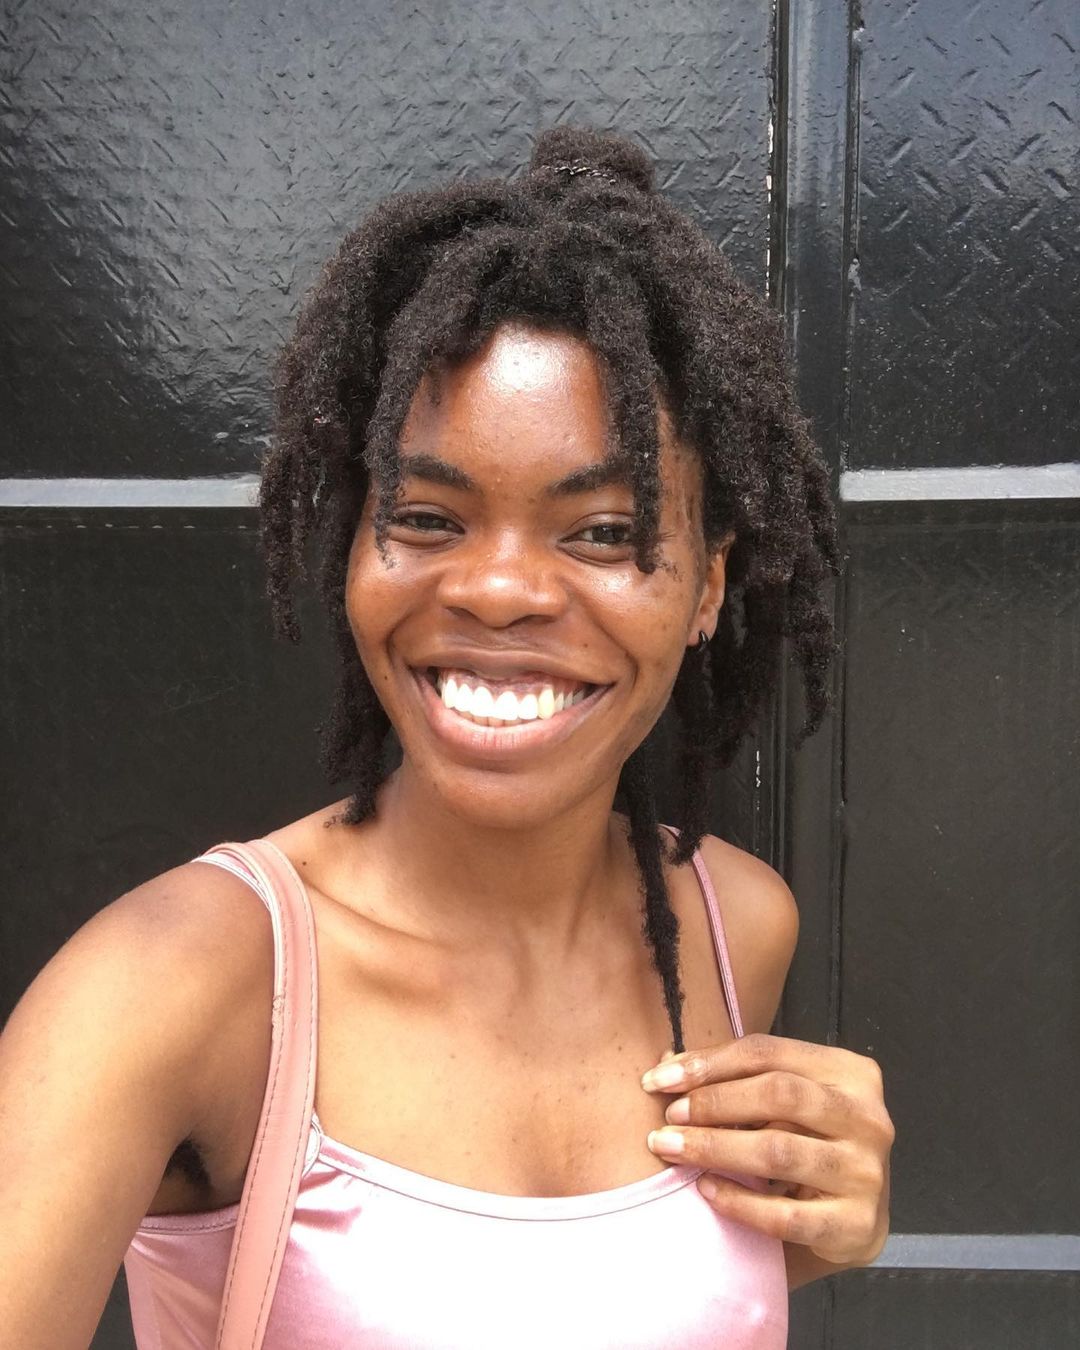 Pretty smiling gal with freeform dreads after 1 year